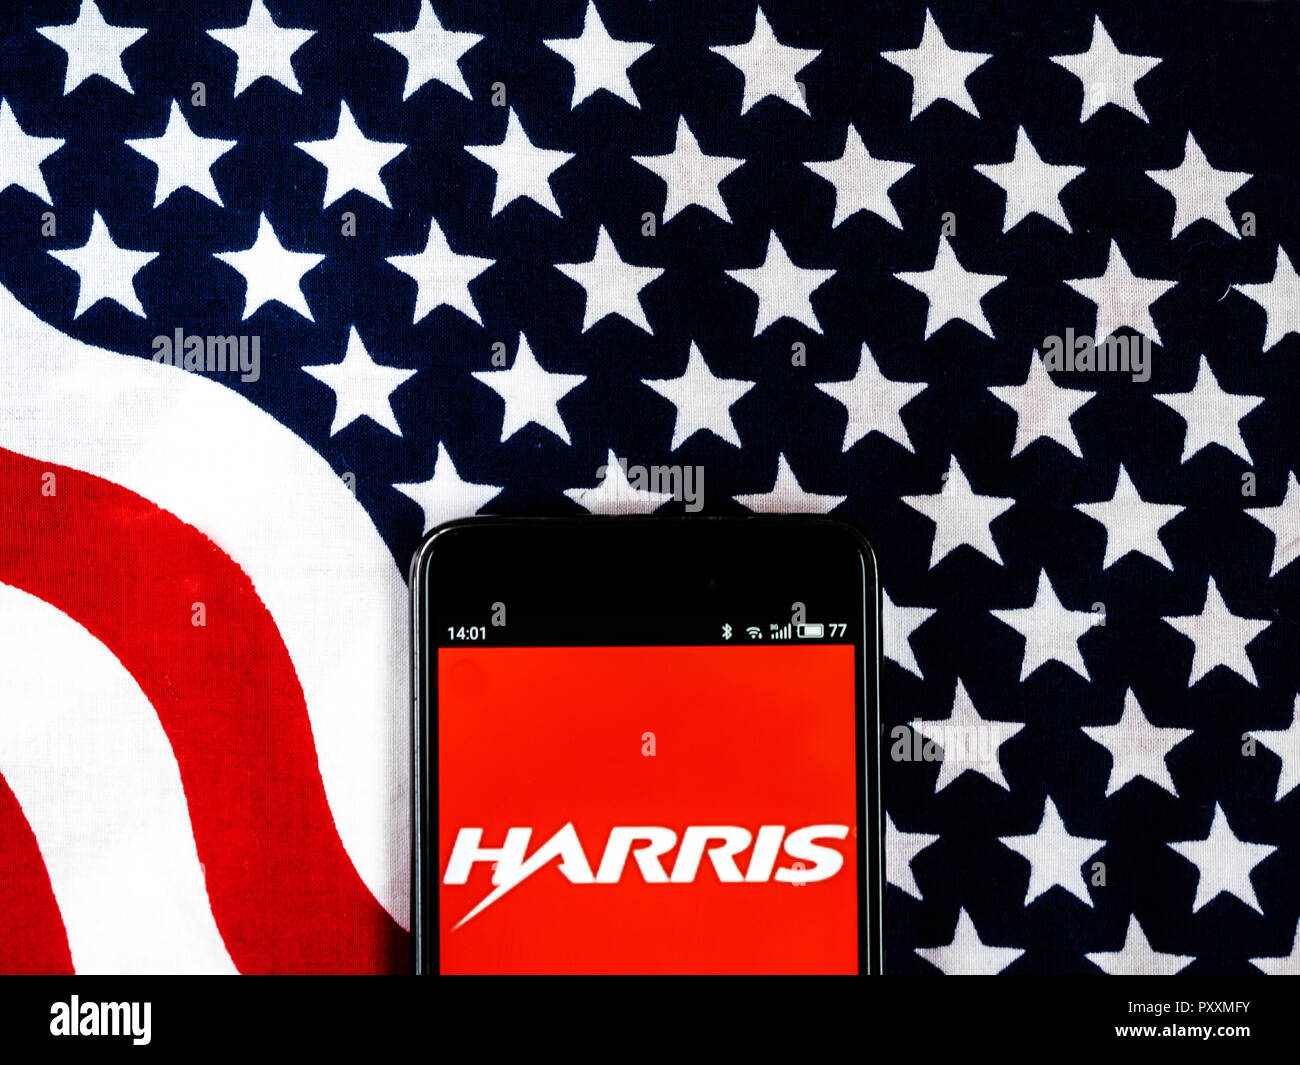 Harris Corporation Company logo seen displayed on smart phone.. Harris Corporation is an American technology company, defense contractor and information technology services provider that produces wireless equipment, tactical radios, electronic systems, night vision equipment and both terrestrial and spaceborne antennas for use in the government, defense and commercial sectors. Stock Photo